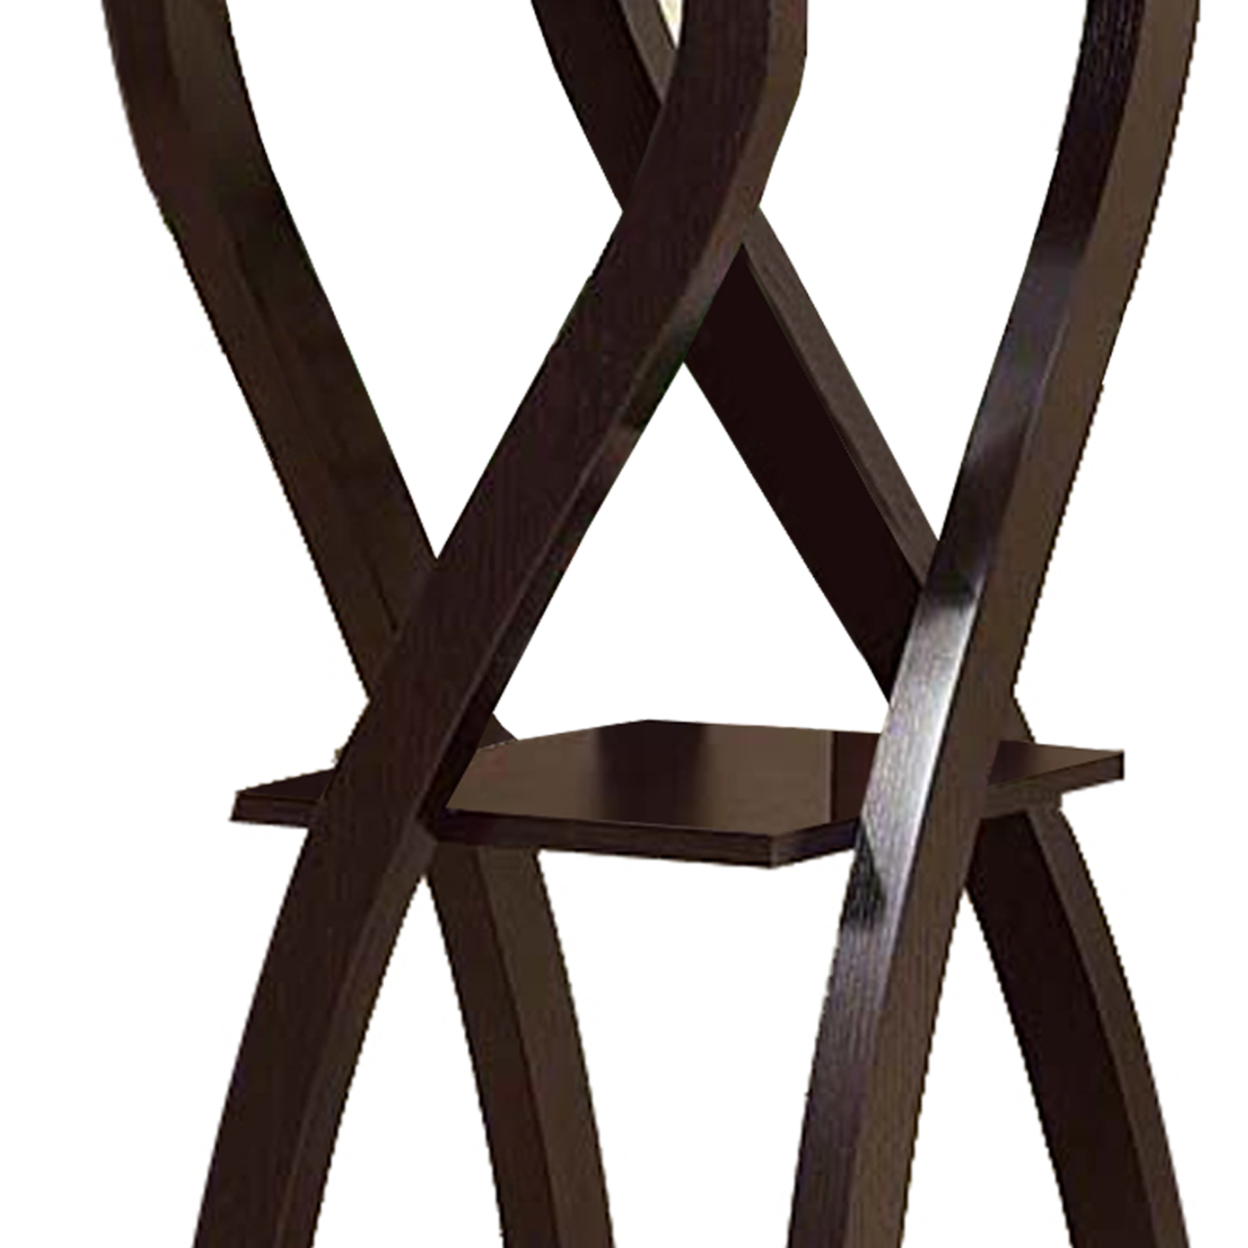 Square Top Wooden Plant Stand With Curved Legs And Shelves, Large, Dark Brown- Saltoro Sherpi